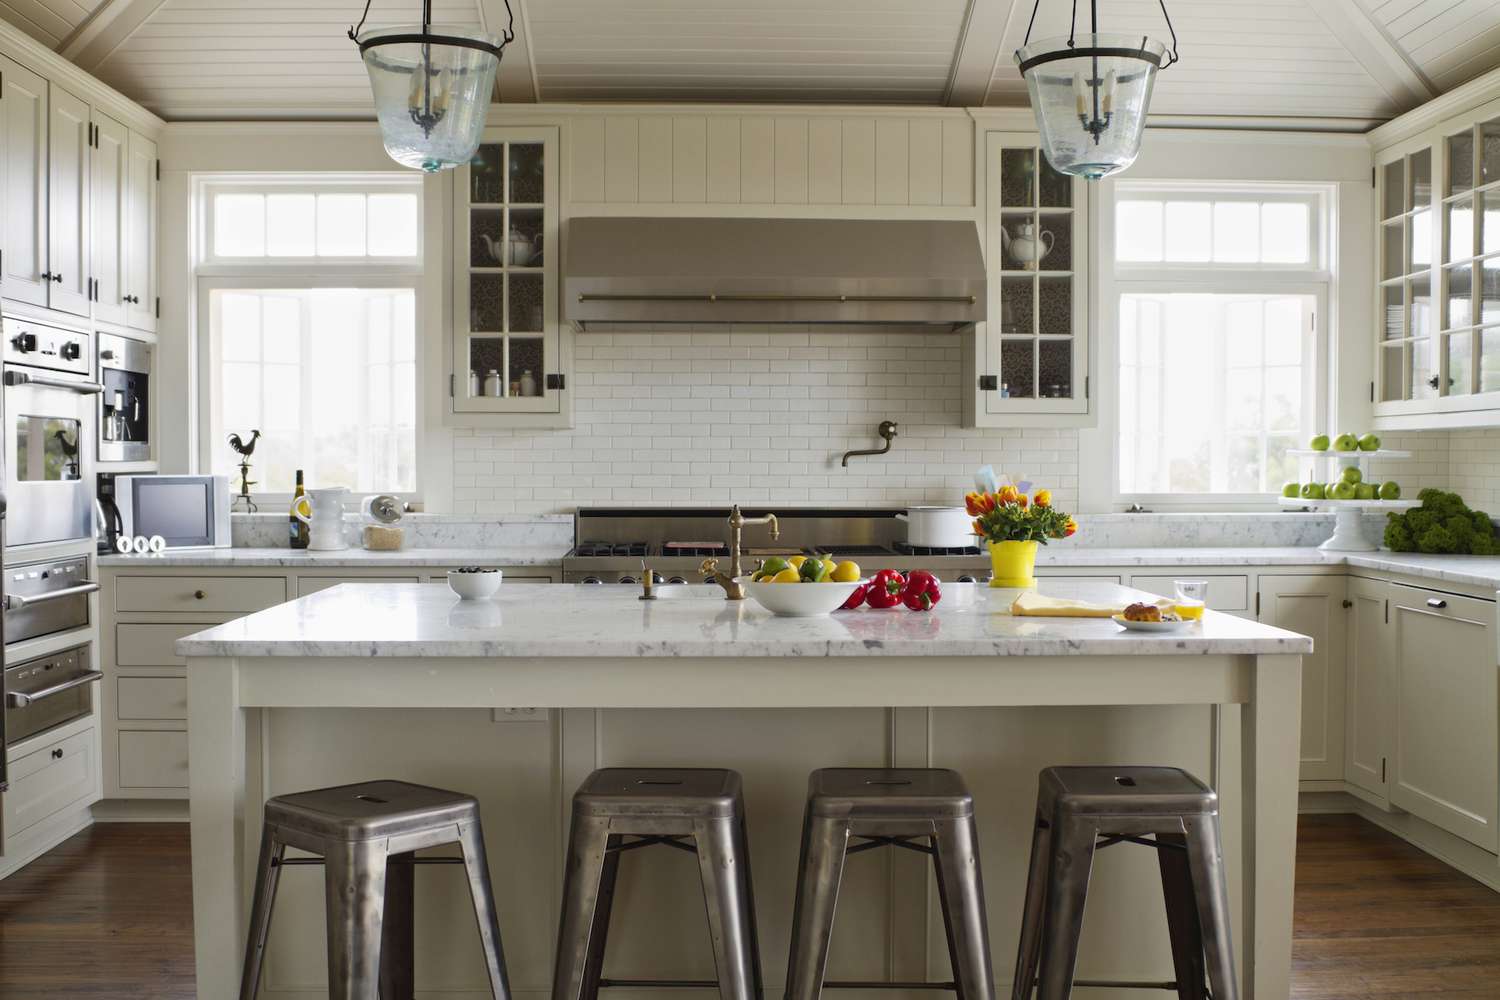 5 Kitchen Trends That Will Be Huge In 2019 Real Simple